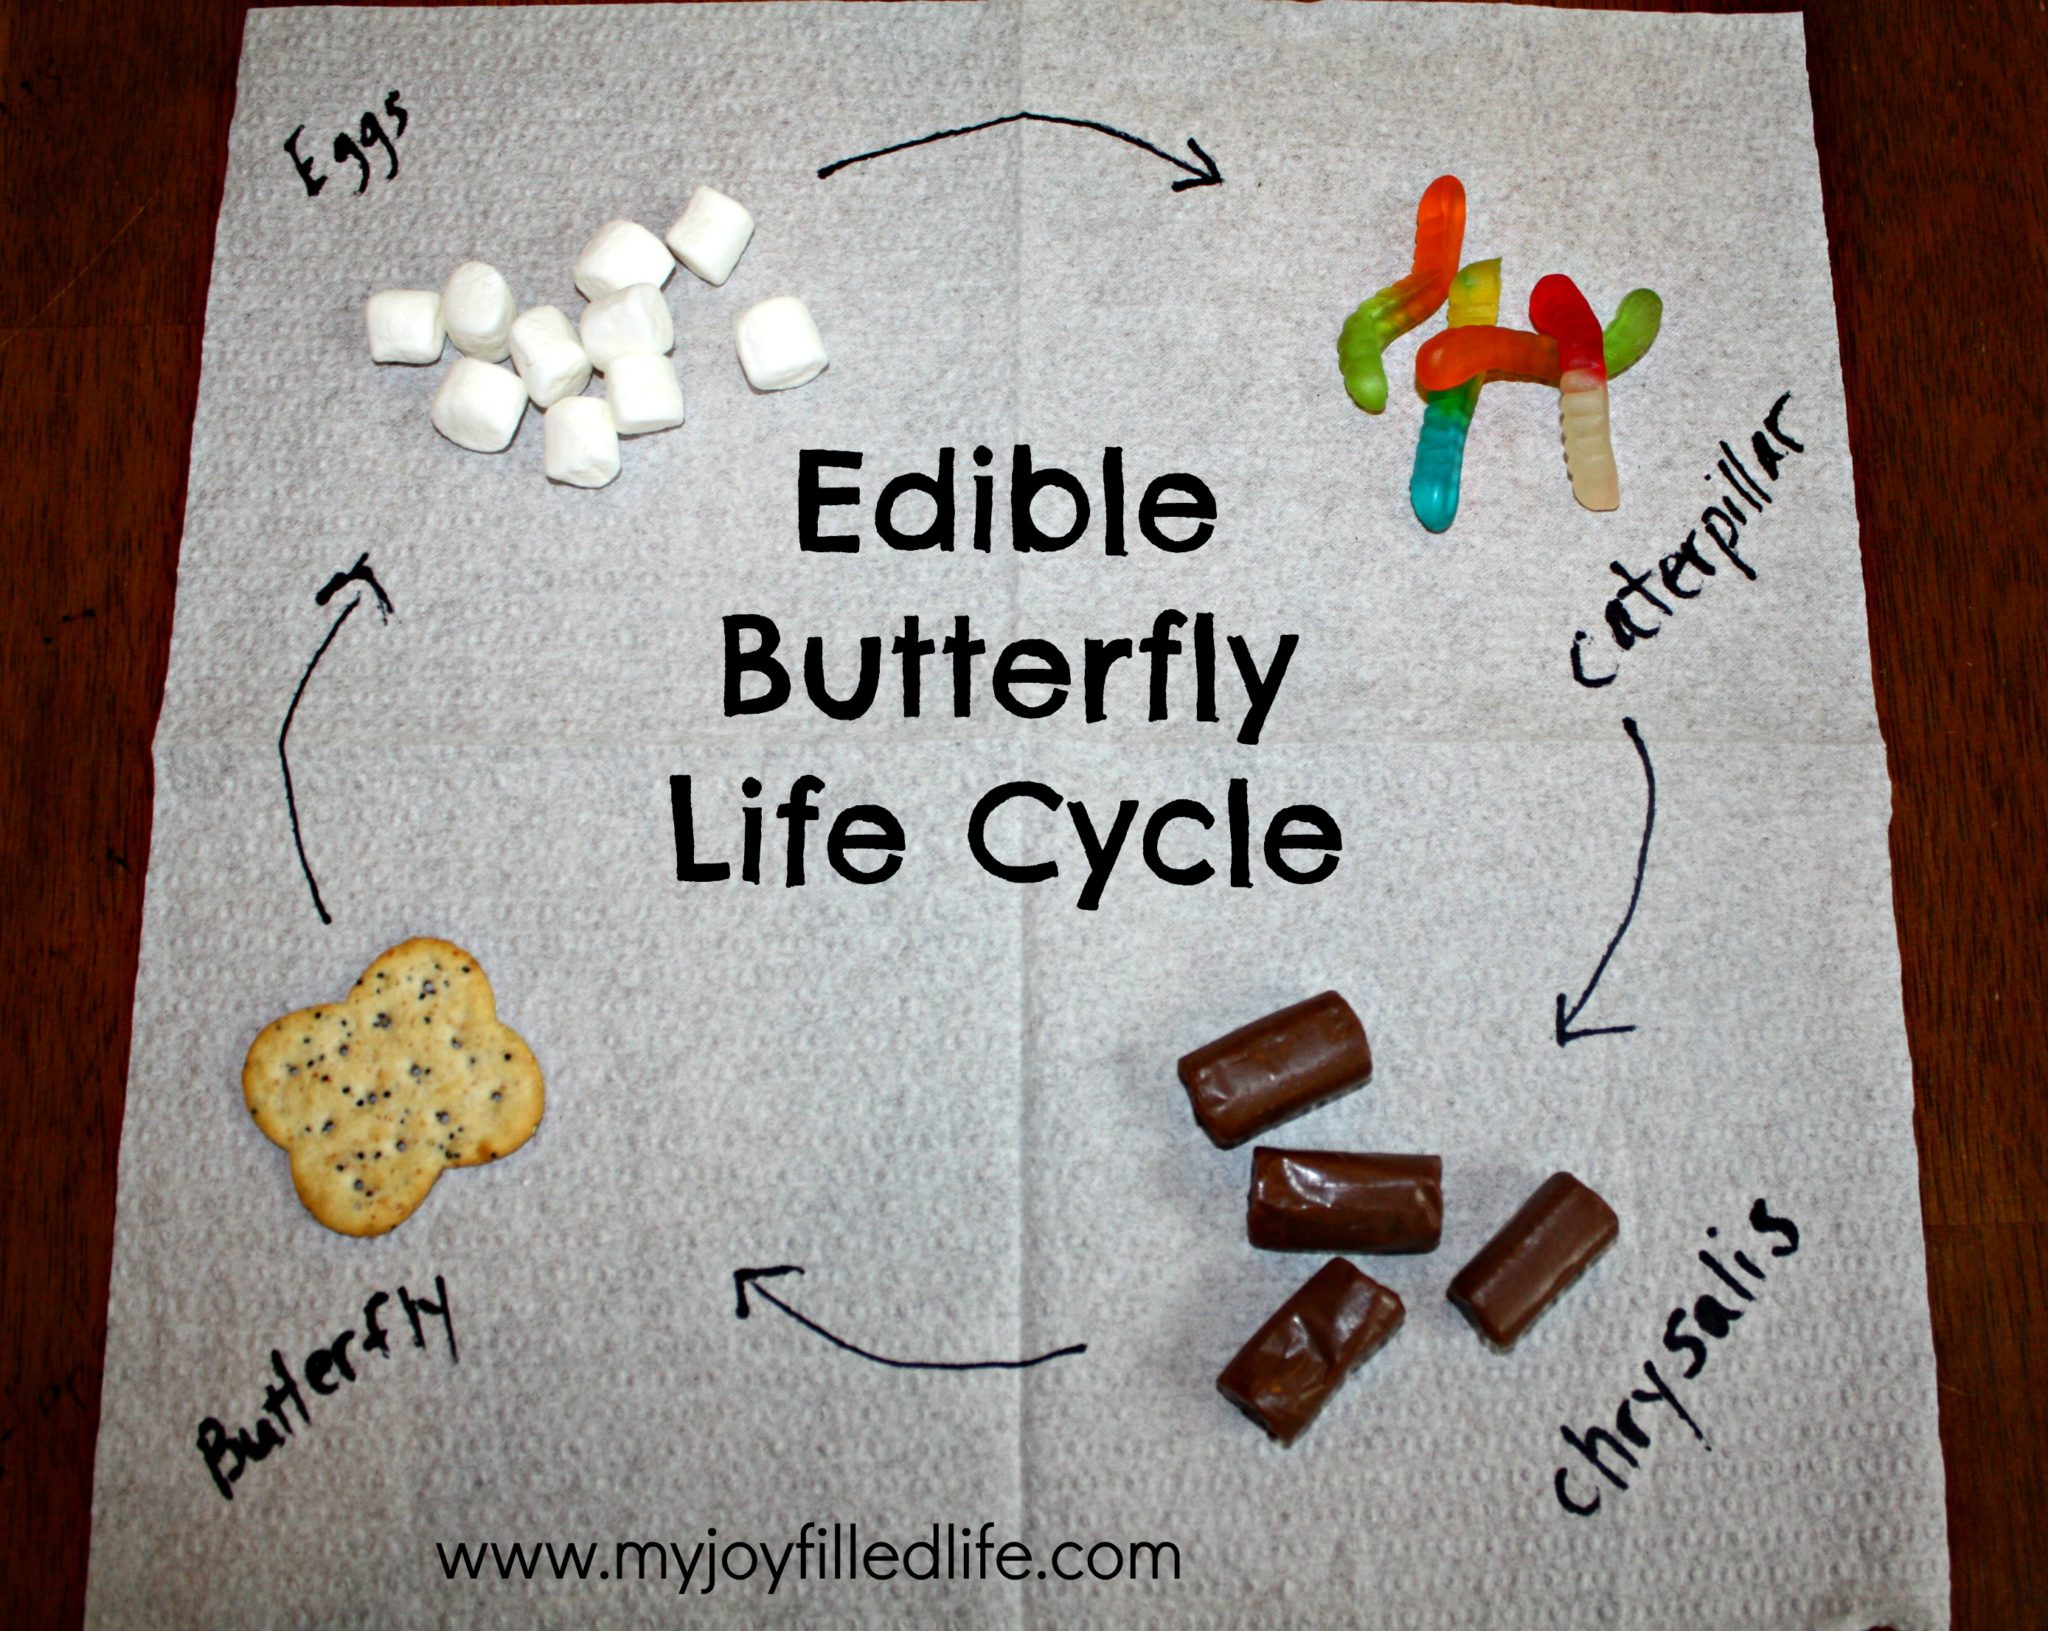 Edible Butterfly Life Cycle